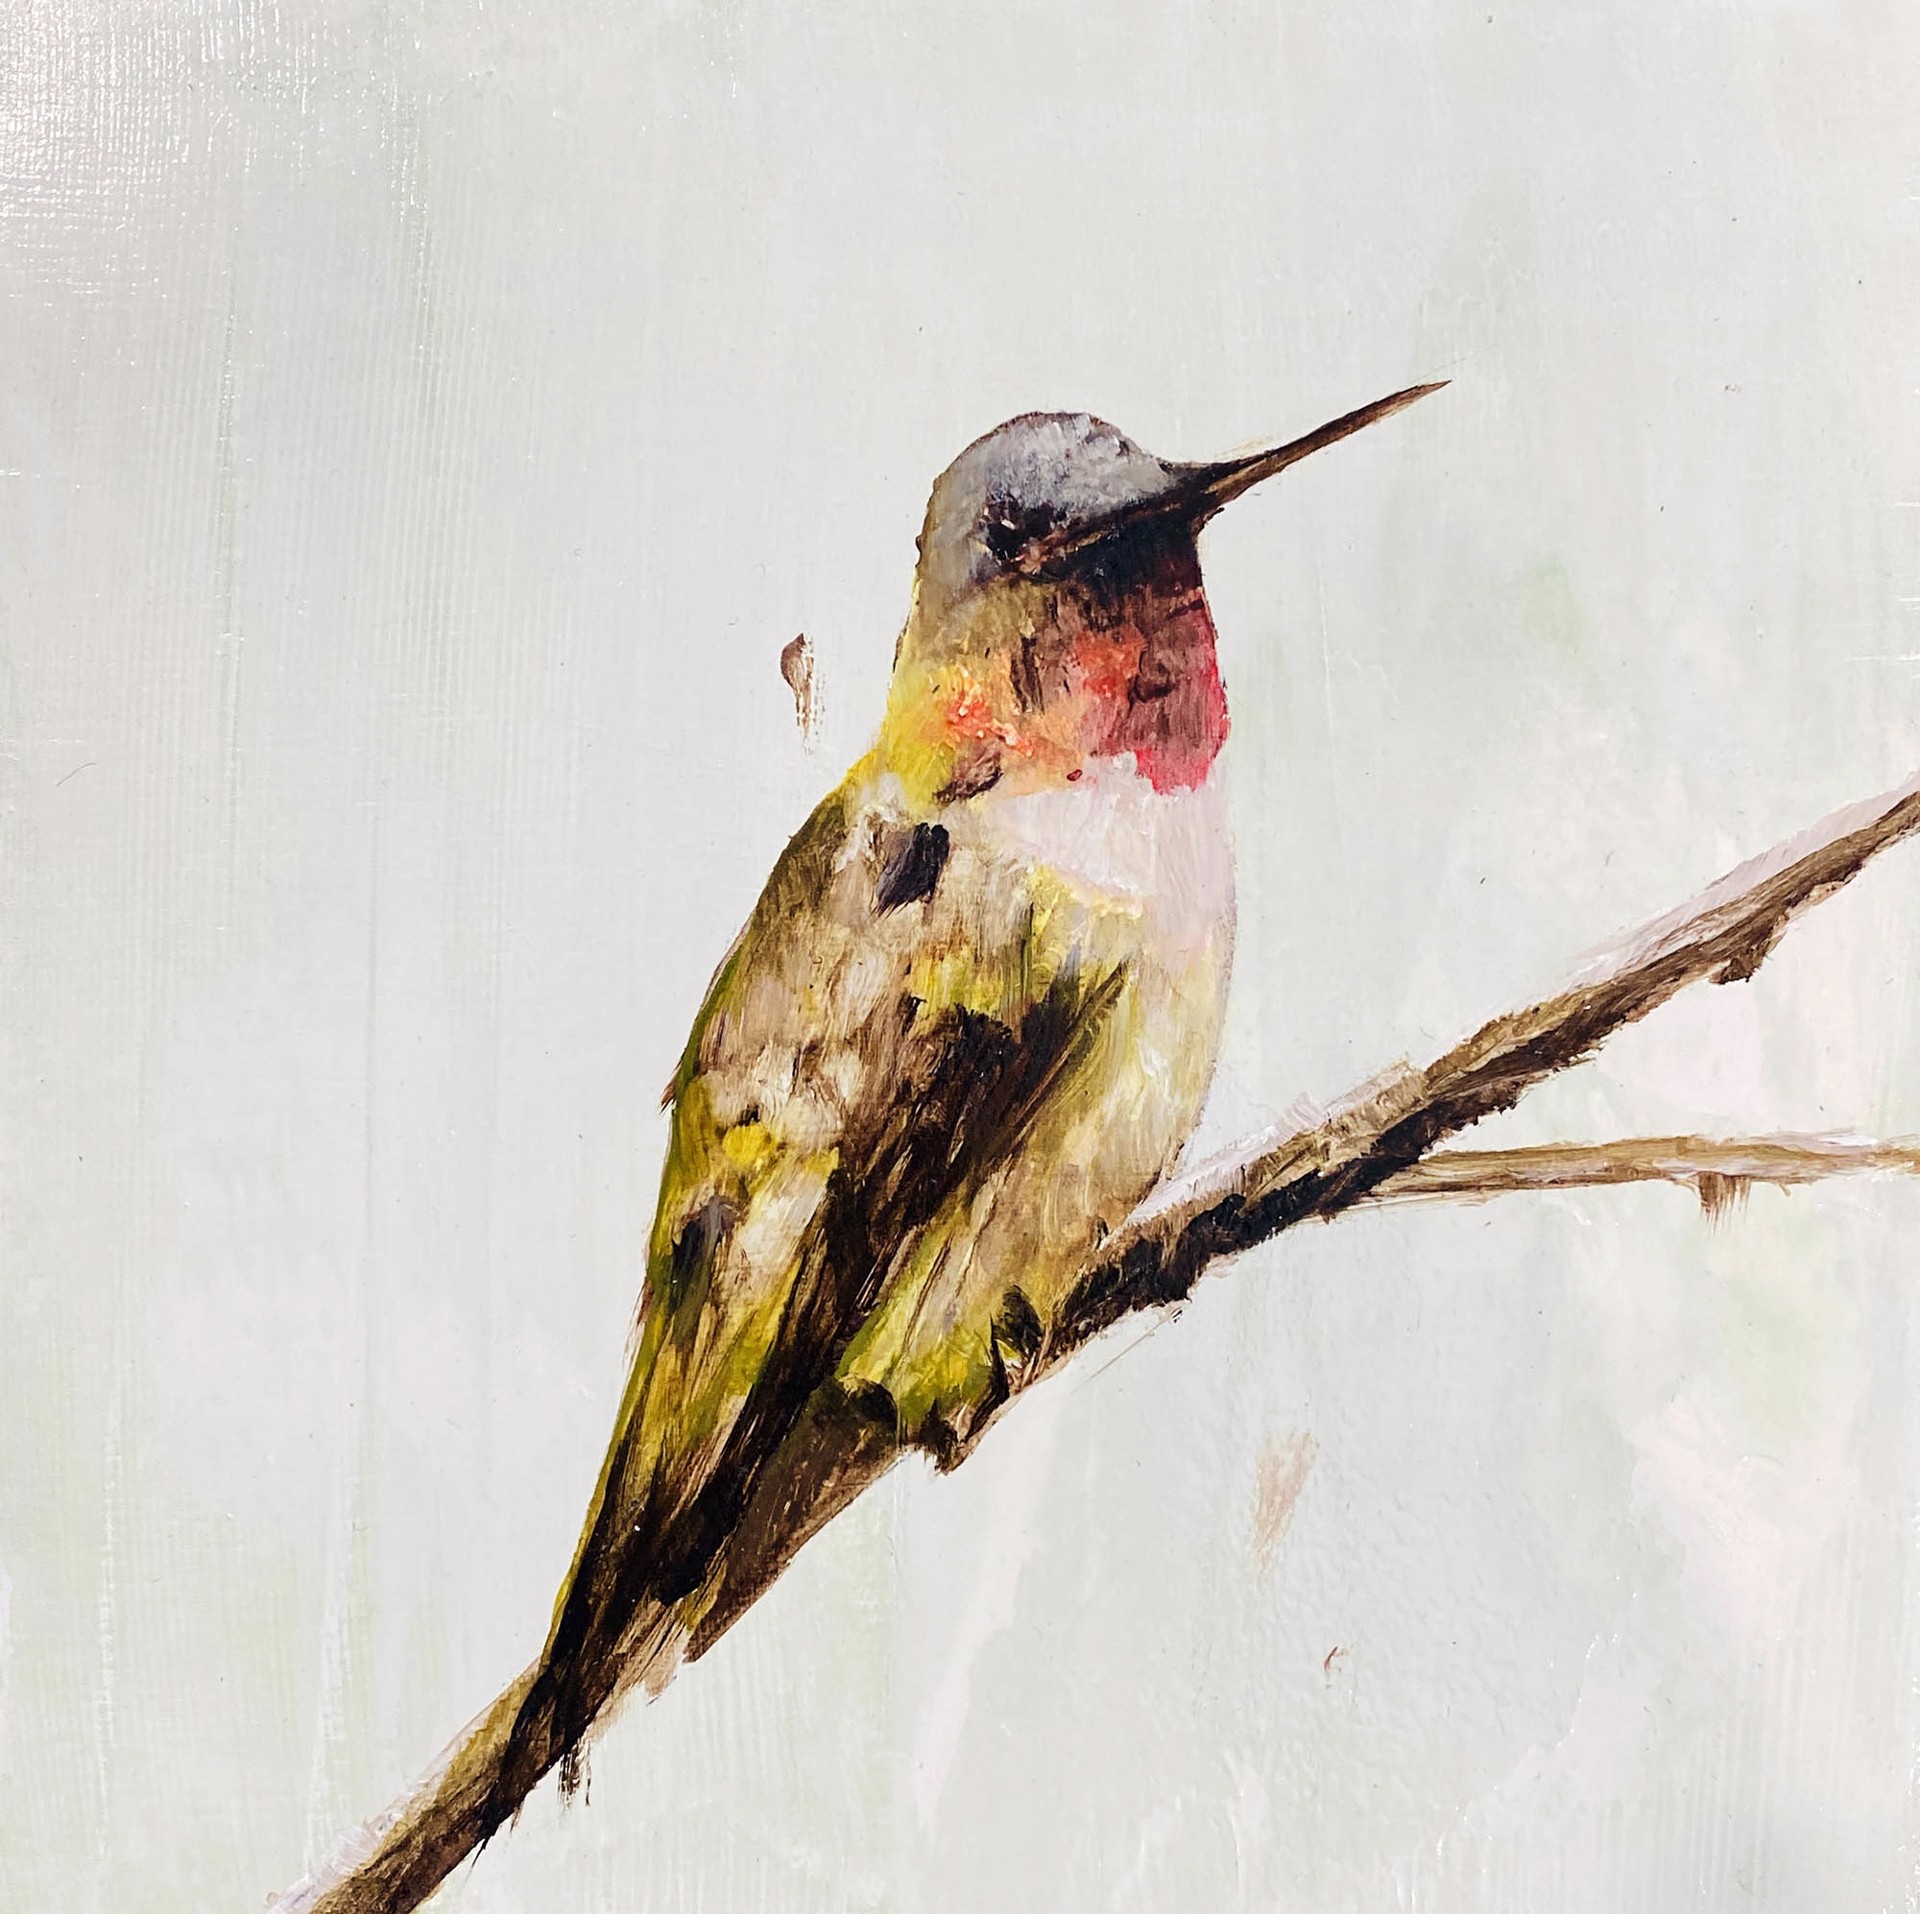 Original Oil Painting Featuring A Hummingbird Sitting On A Branch On Gray Background